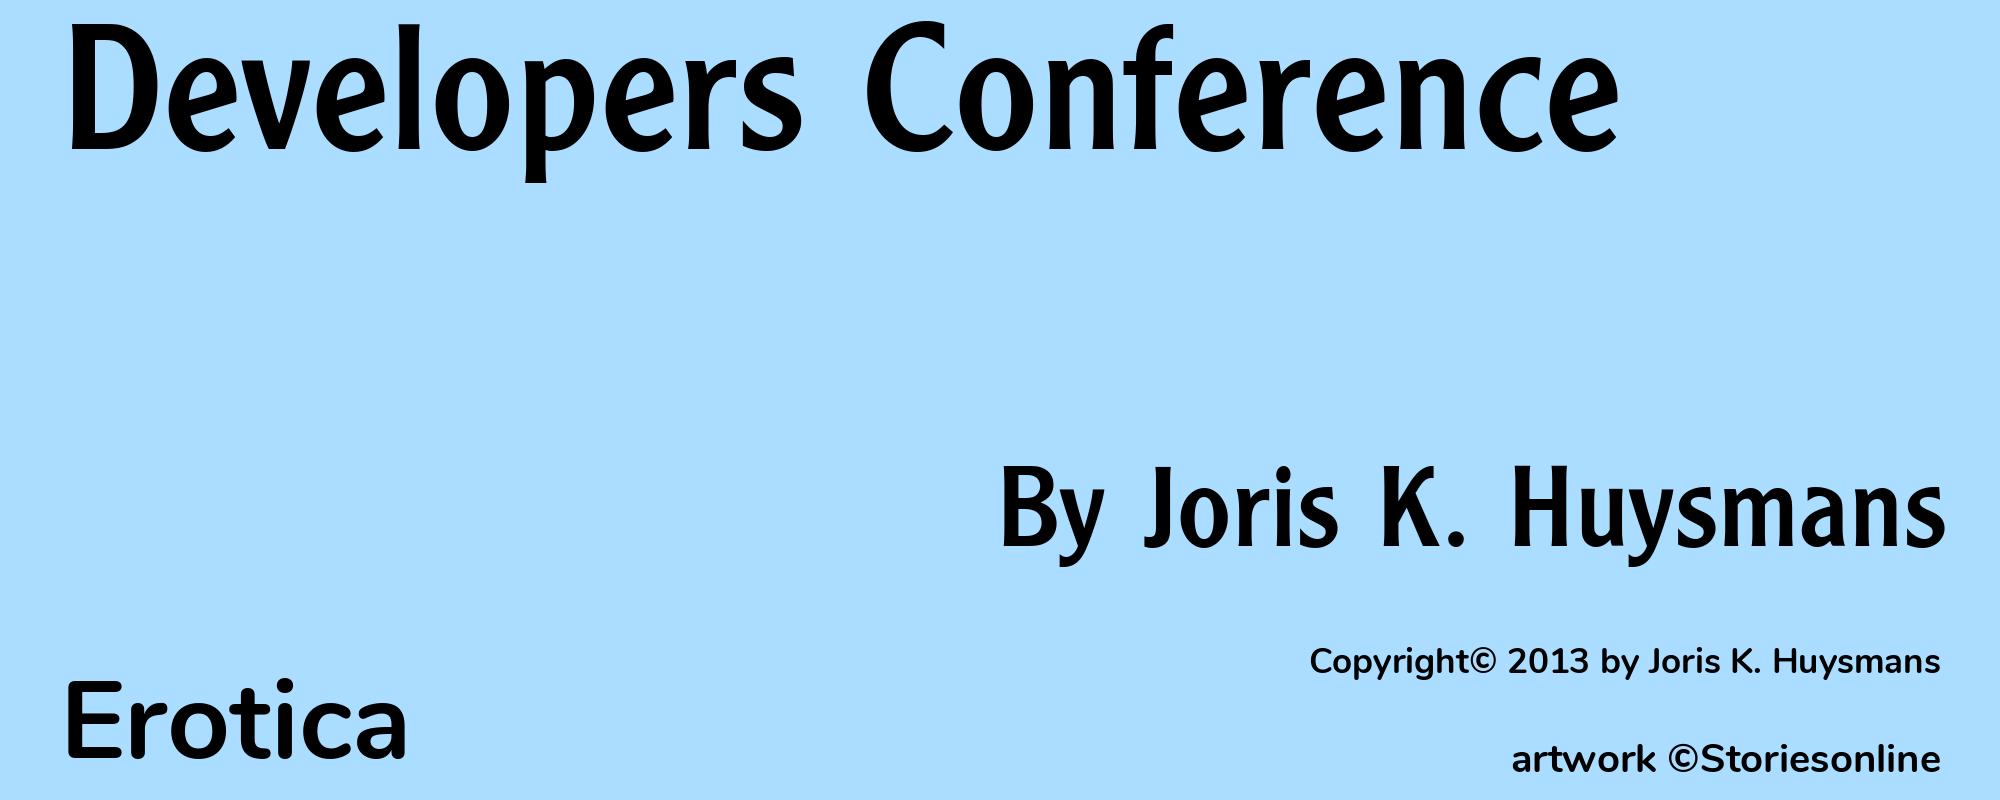 Developers Conference - Cover